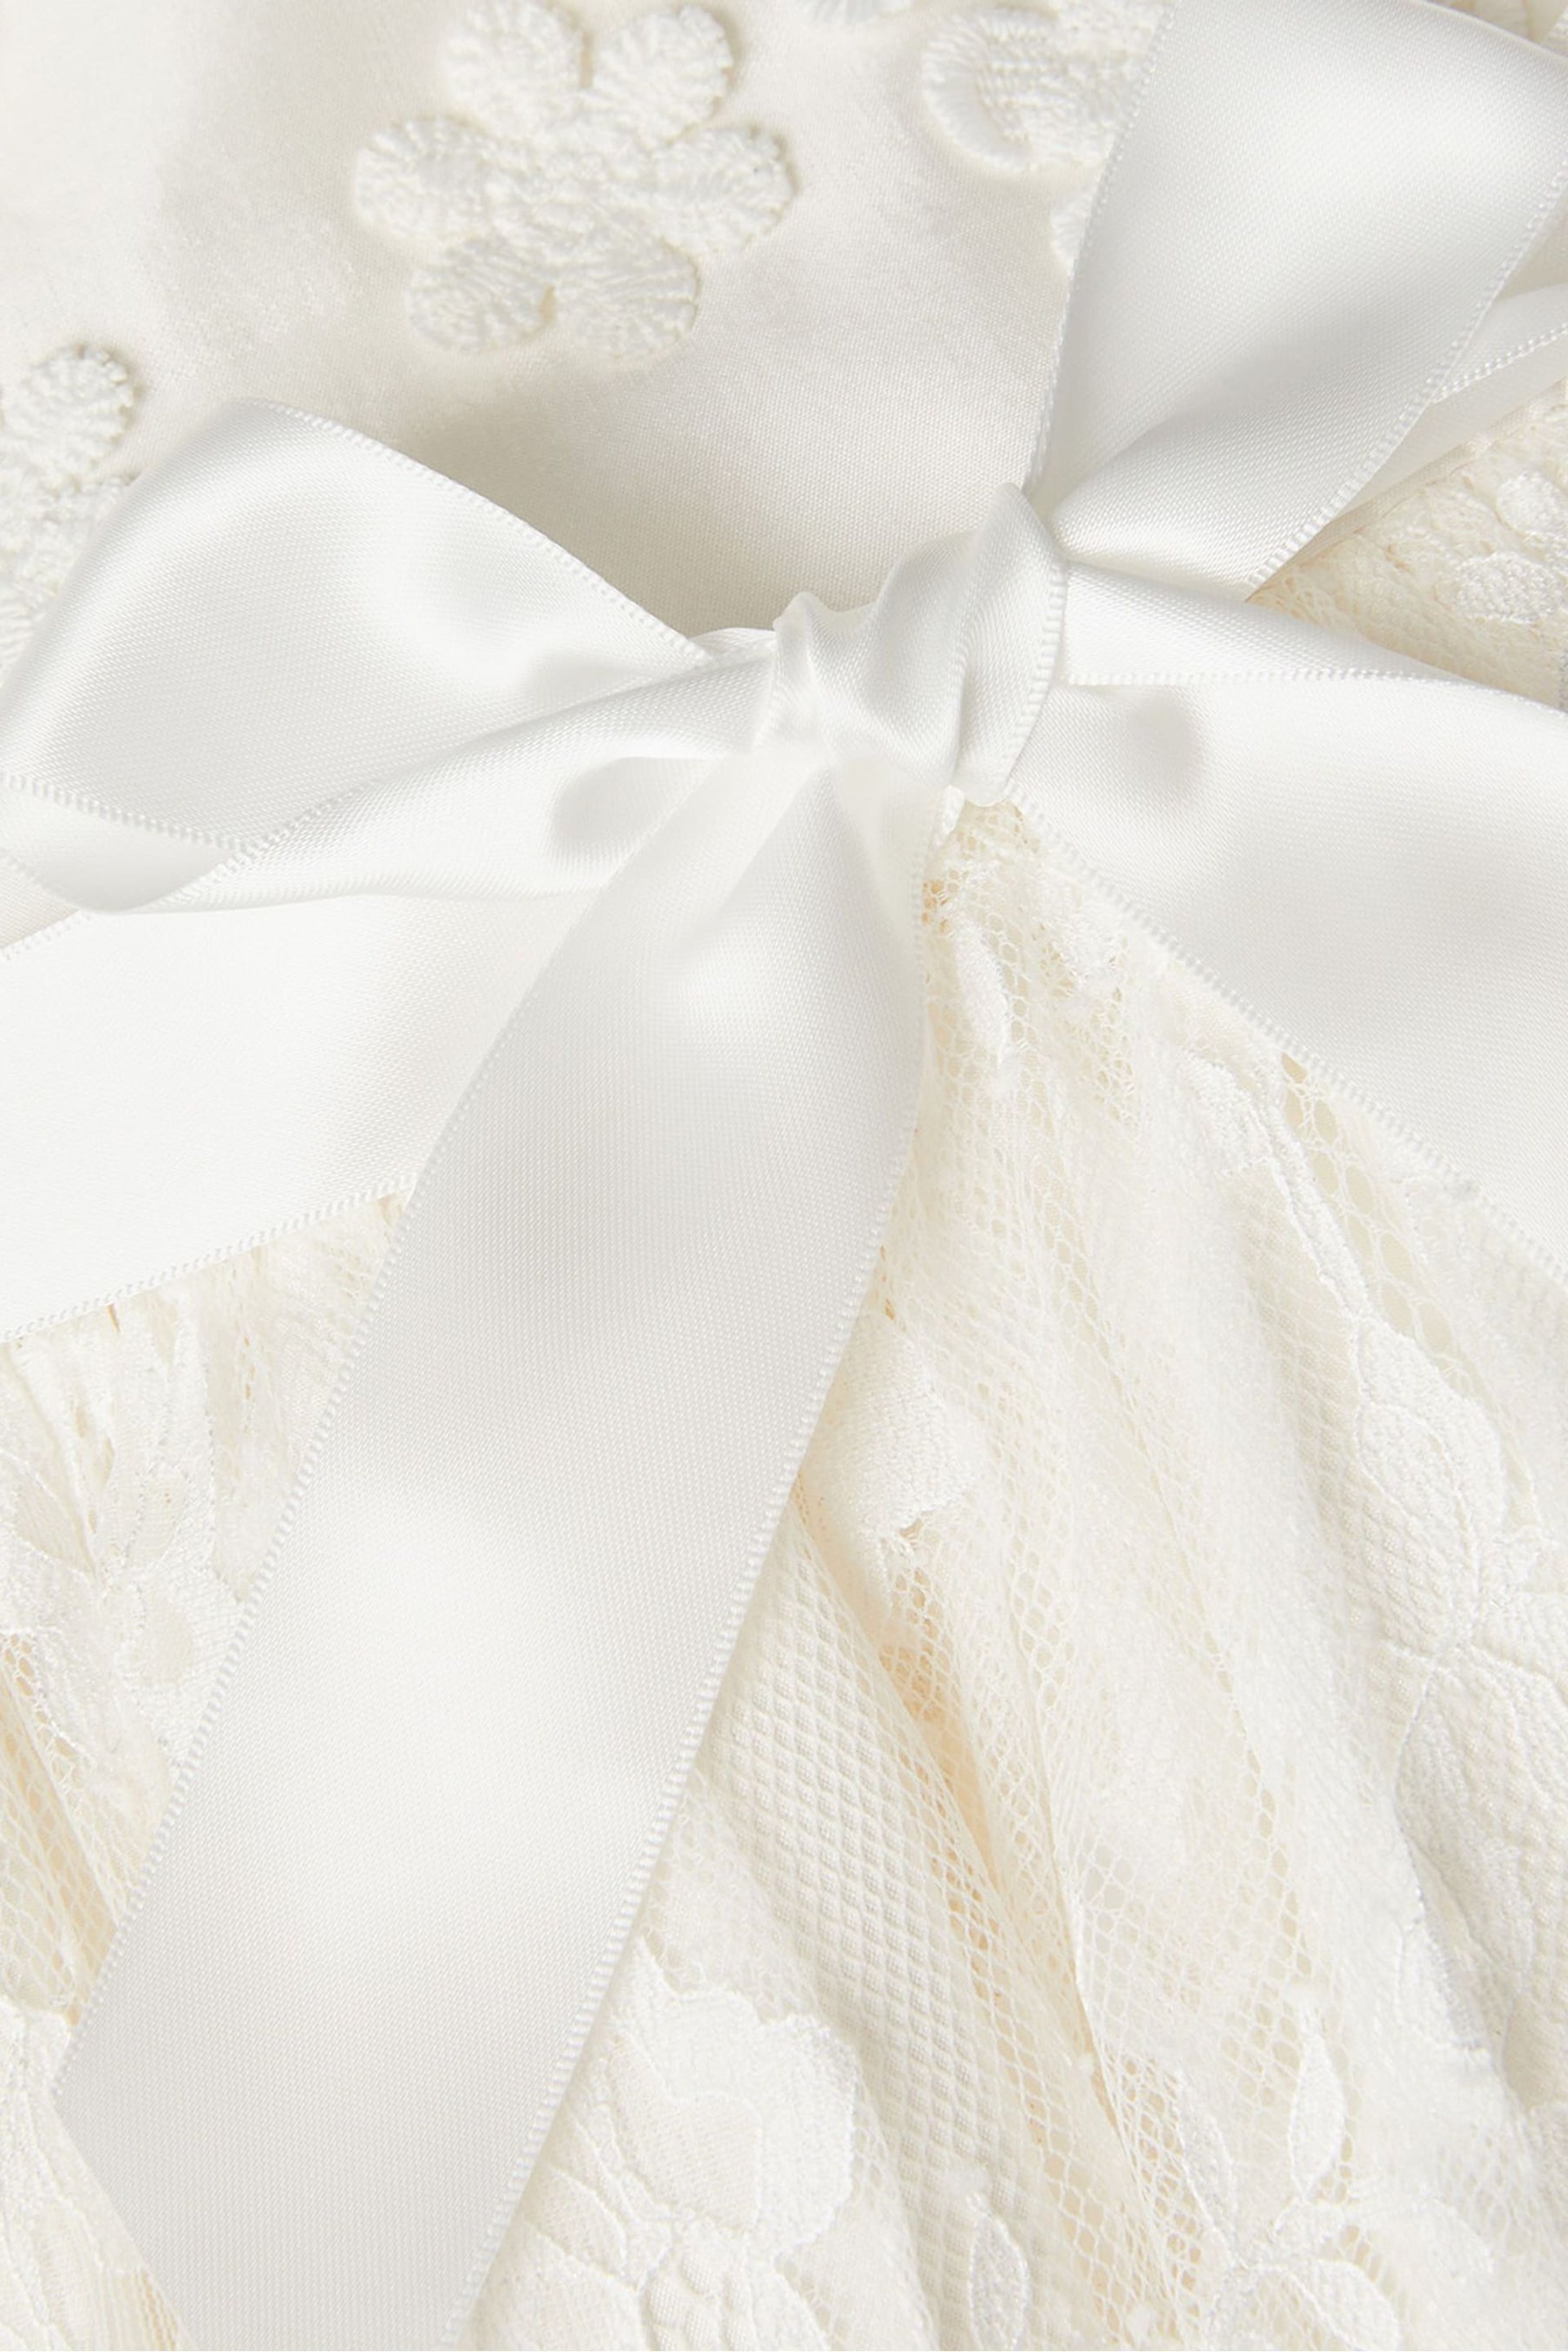 Monsoon Natural Baby Provenza Silk Christening Gown - Image 3 of 3